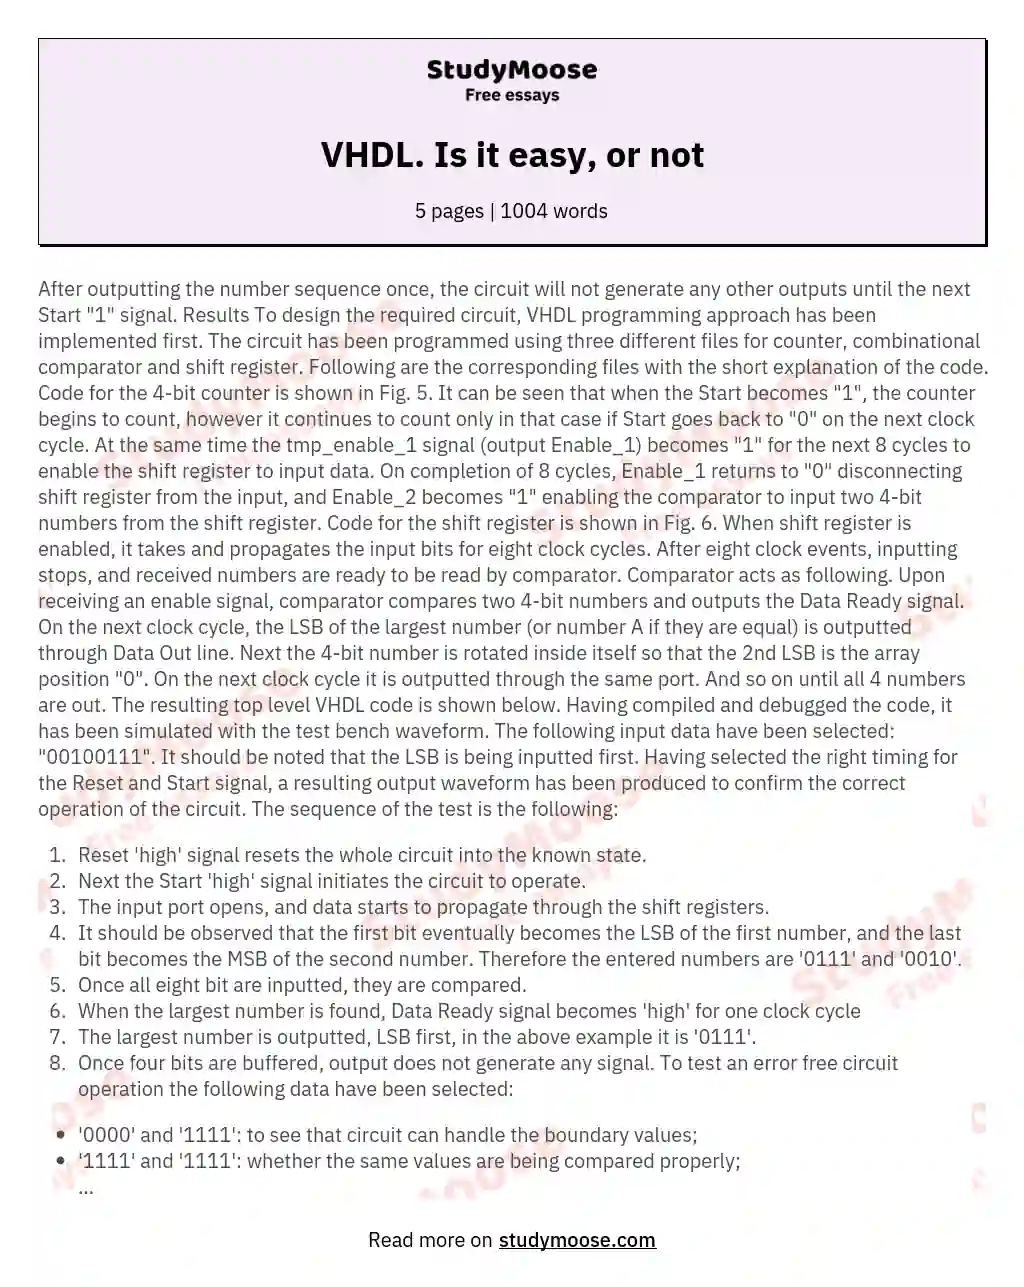 VHDL. Is it easy, or not essay